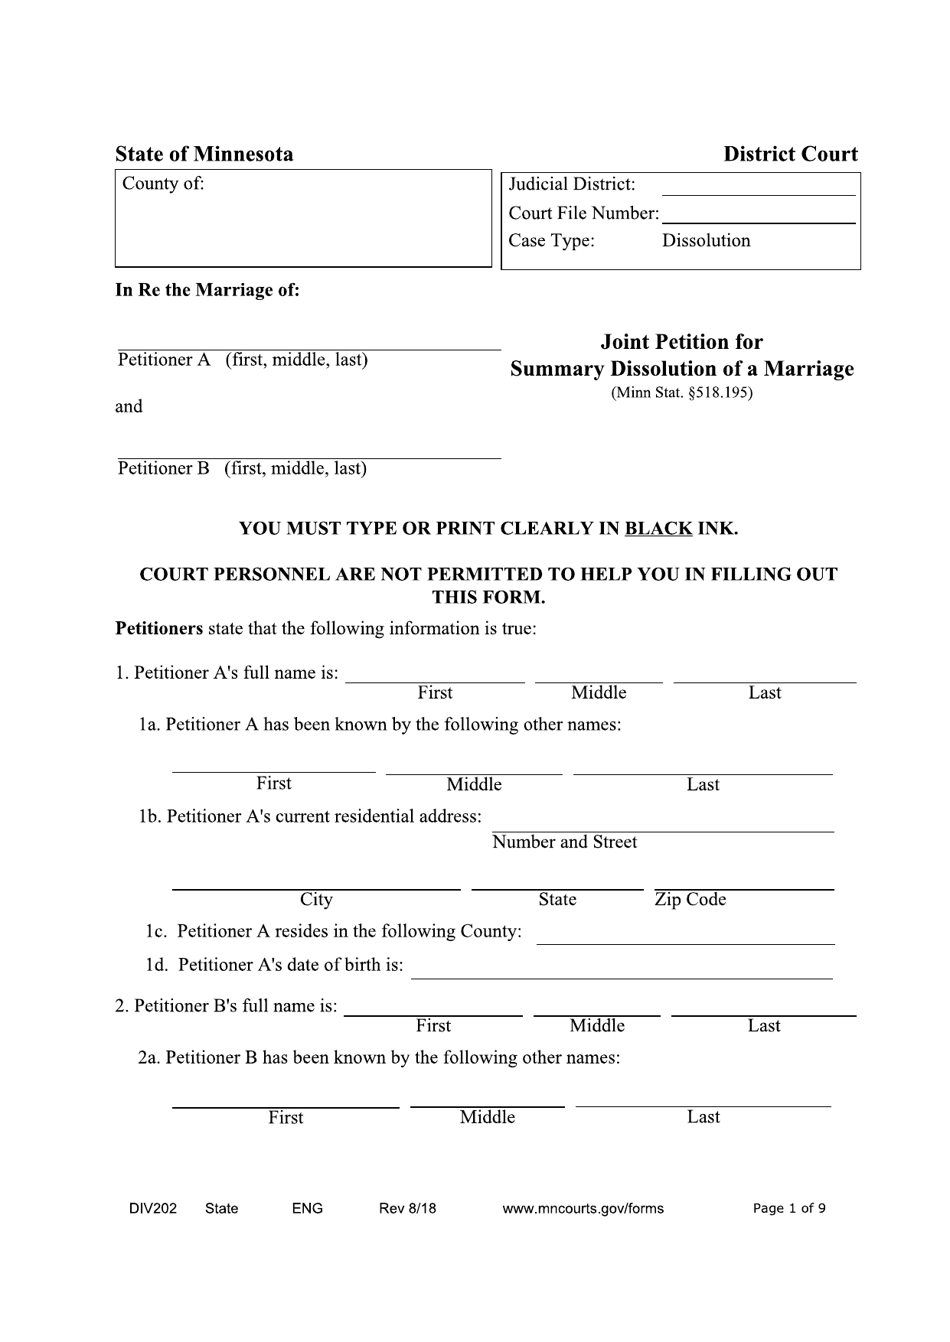 Form DIV202 Joint Petition for Summary Dissolution of a Marriage - Minnesota, Page 1